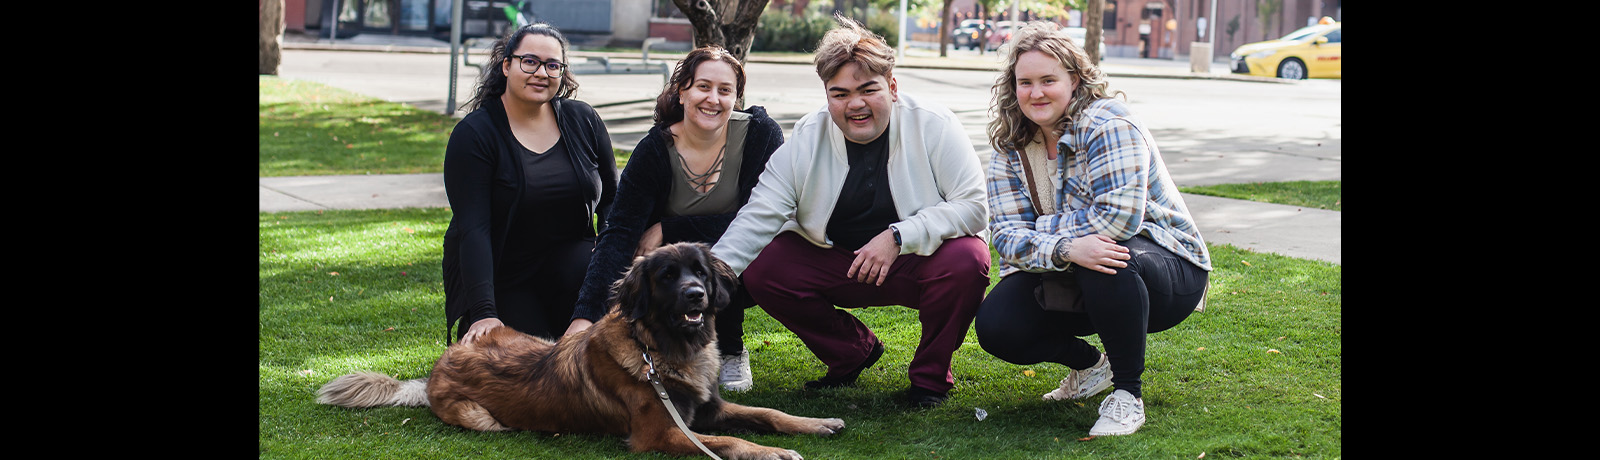 Four people crouch on the grass with a large brown and black dog, all smiling.